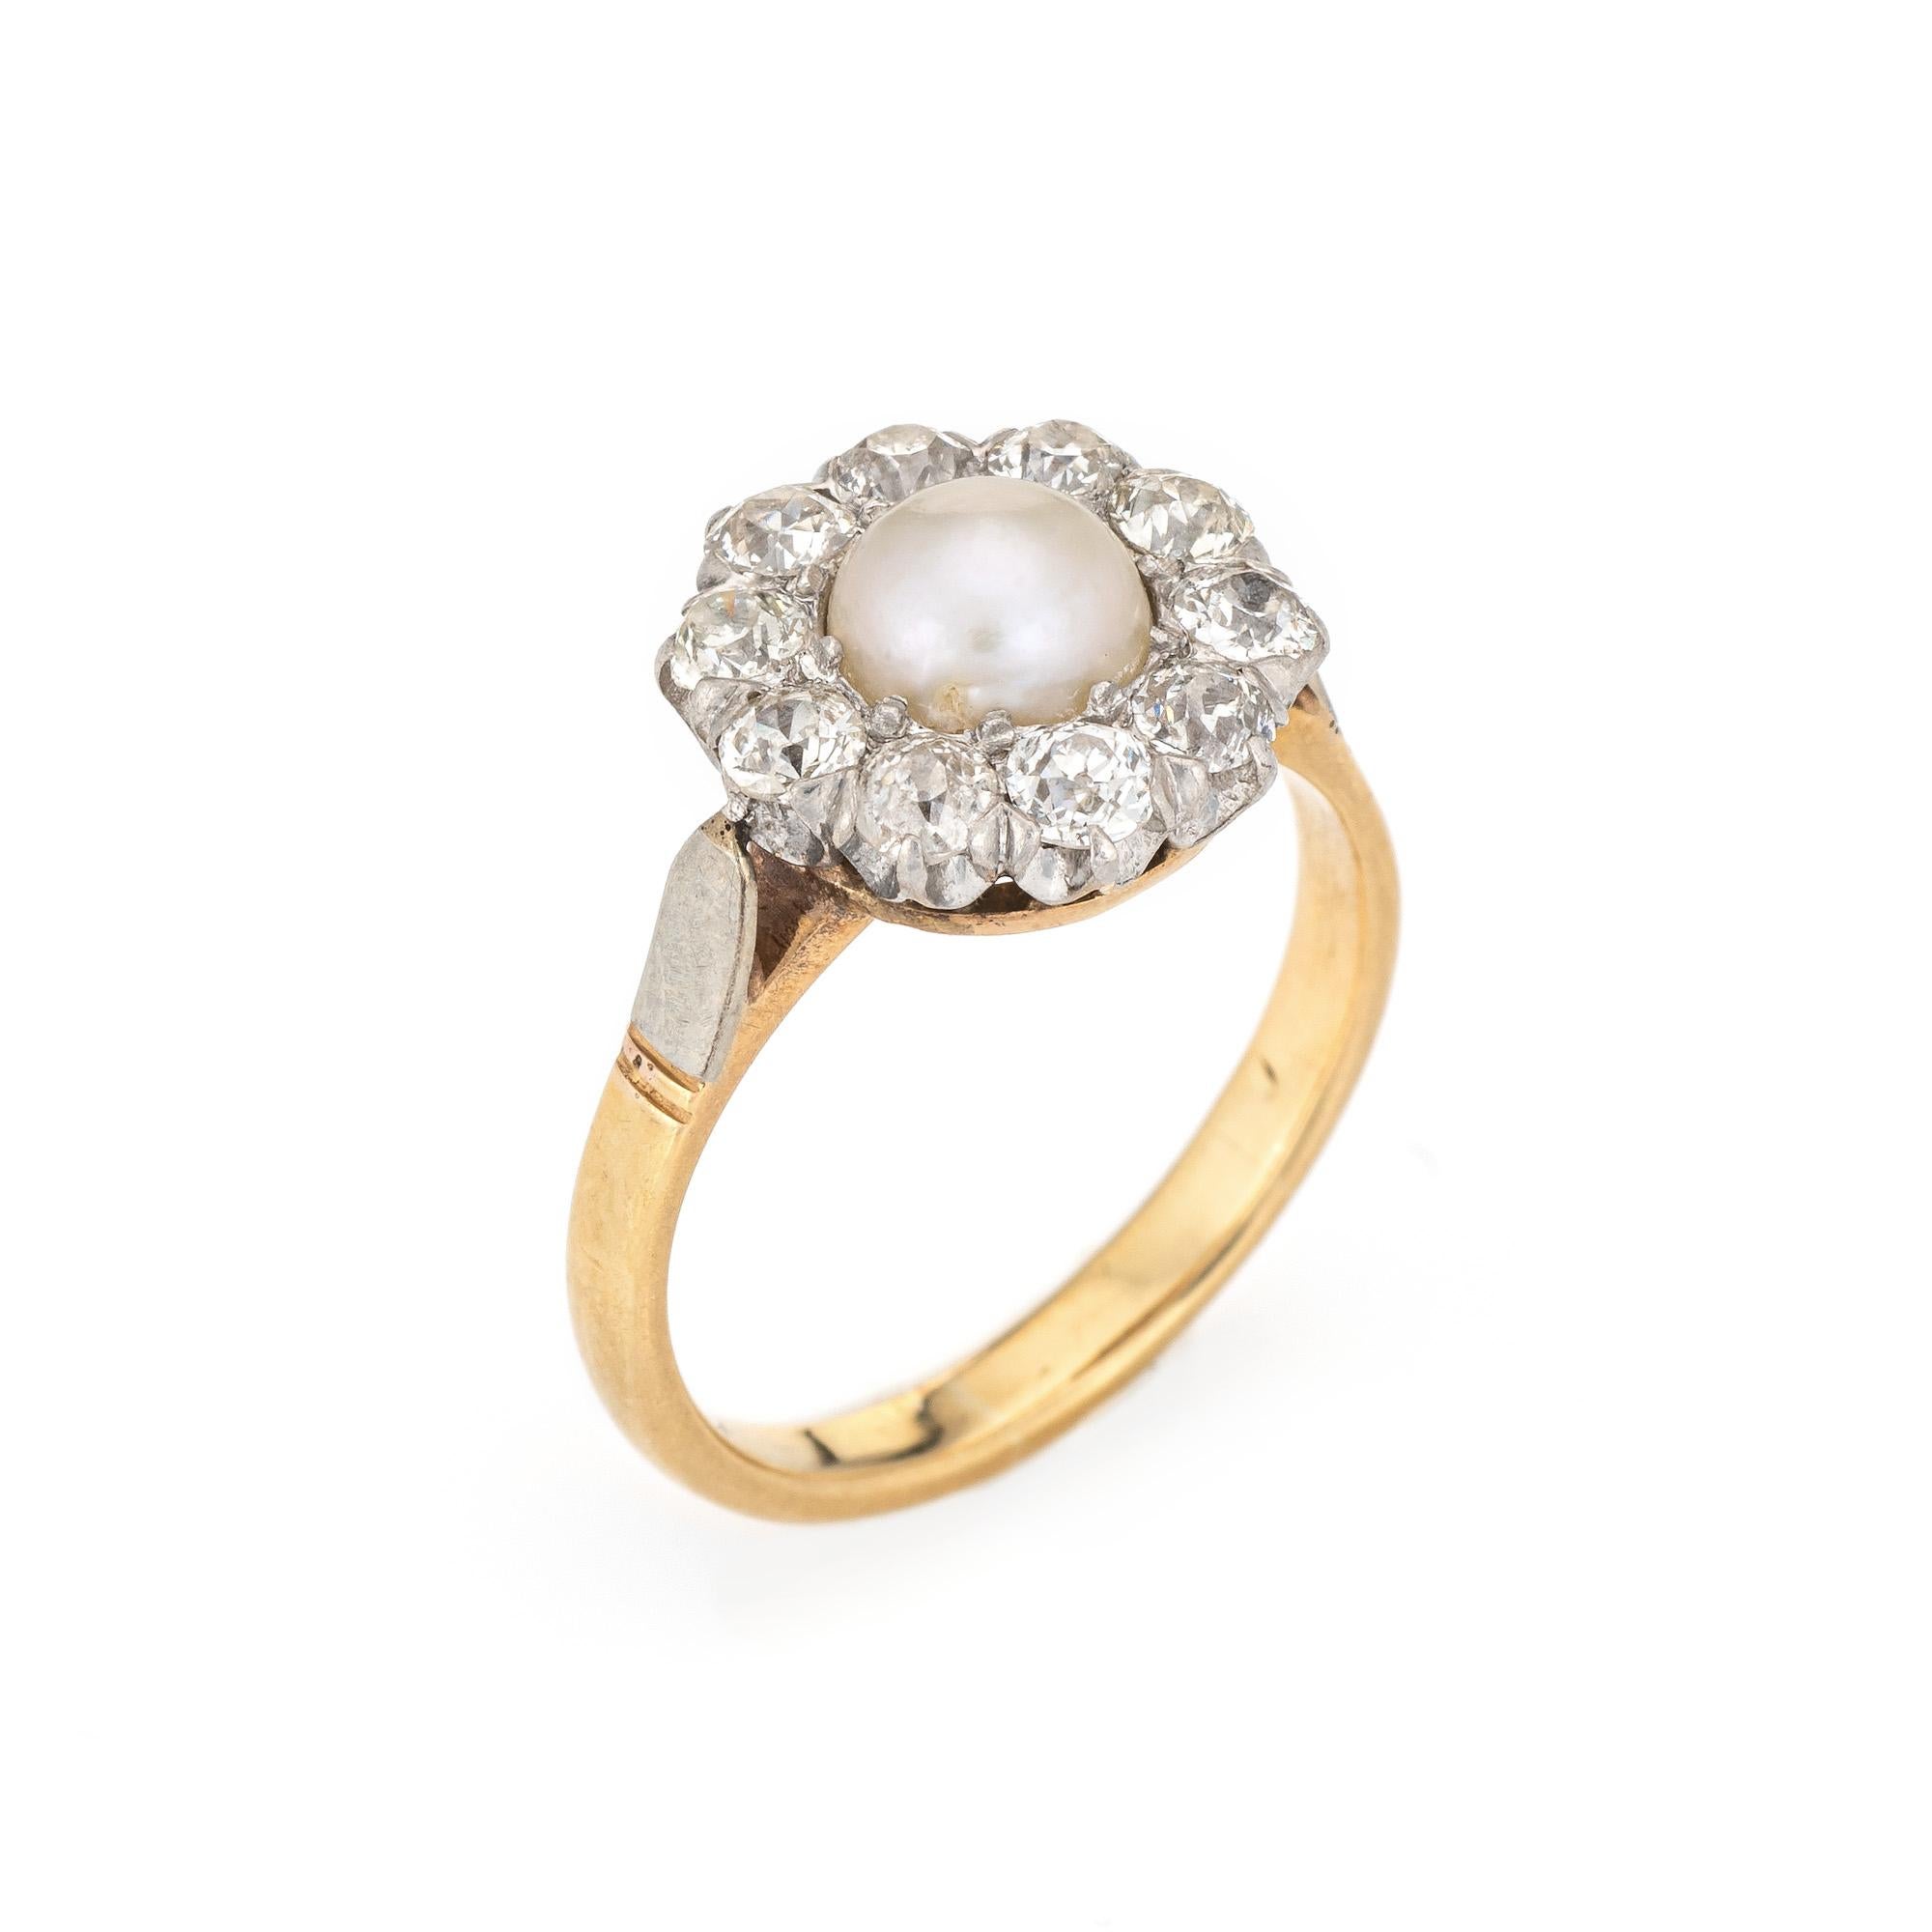 Finely detailed antique Edwardian diamond & pearl engagement ring crafted in 18k yellow gold and platinum (circa 1910s).  

Ten old mine cut diamonds are estimated at 0.15 carats each and total an estimated 1.50 carats (estimated at I-J color and